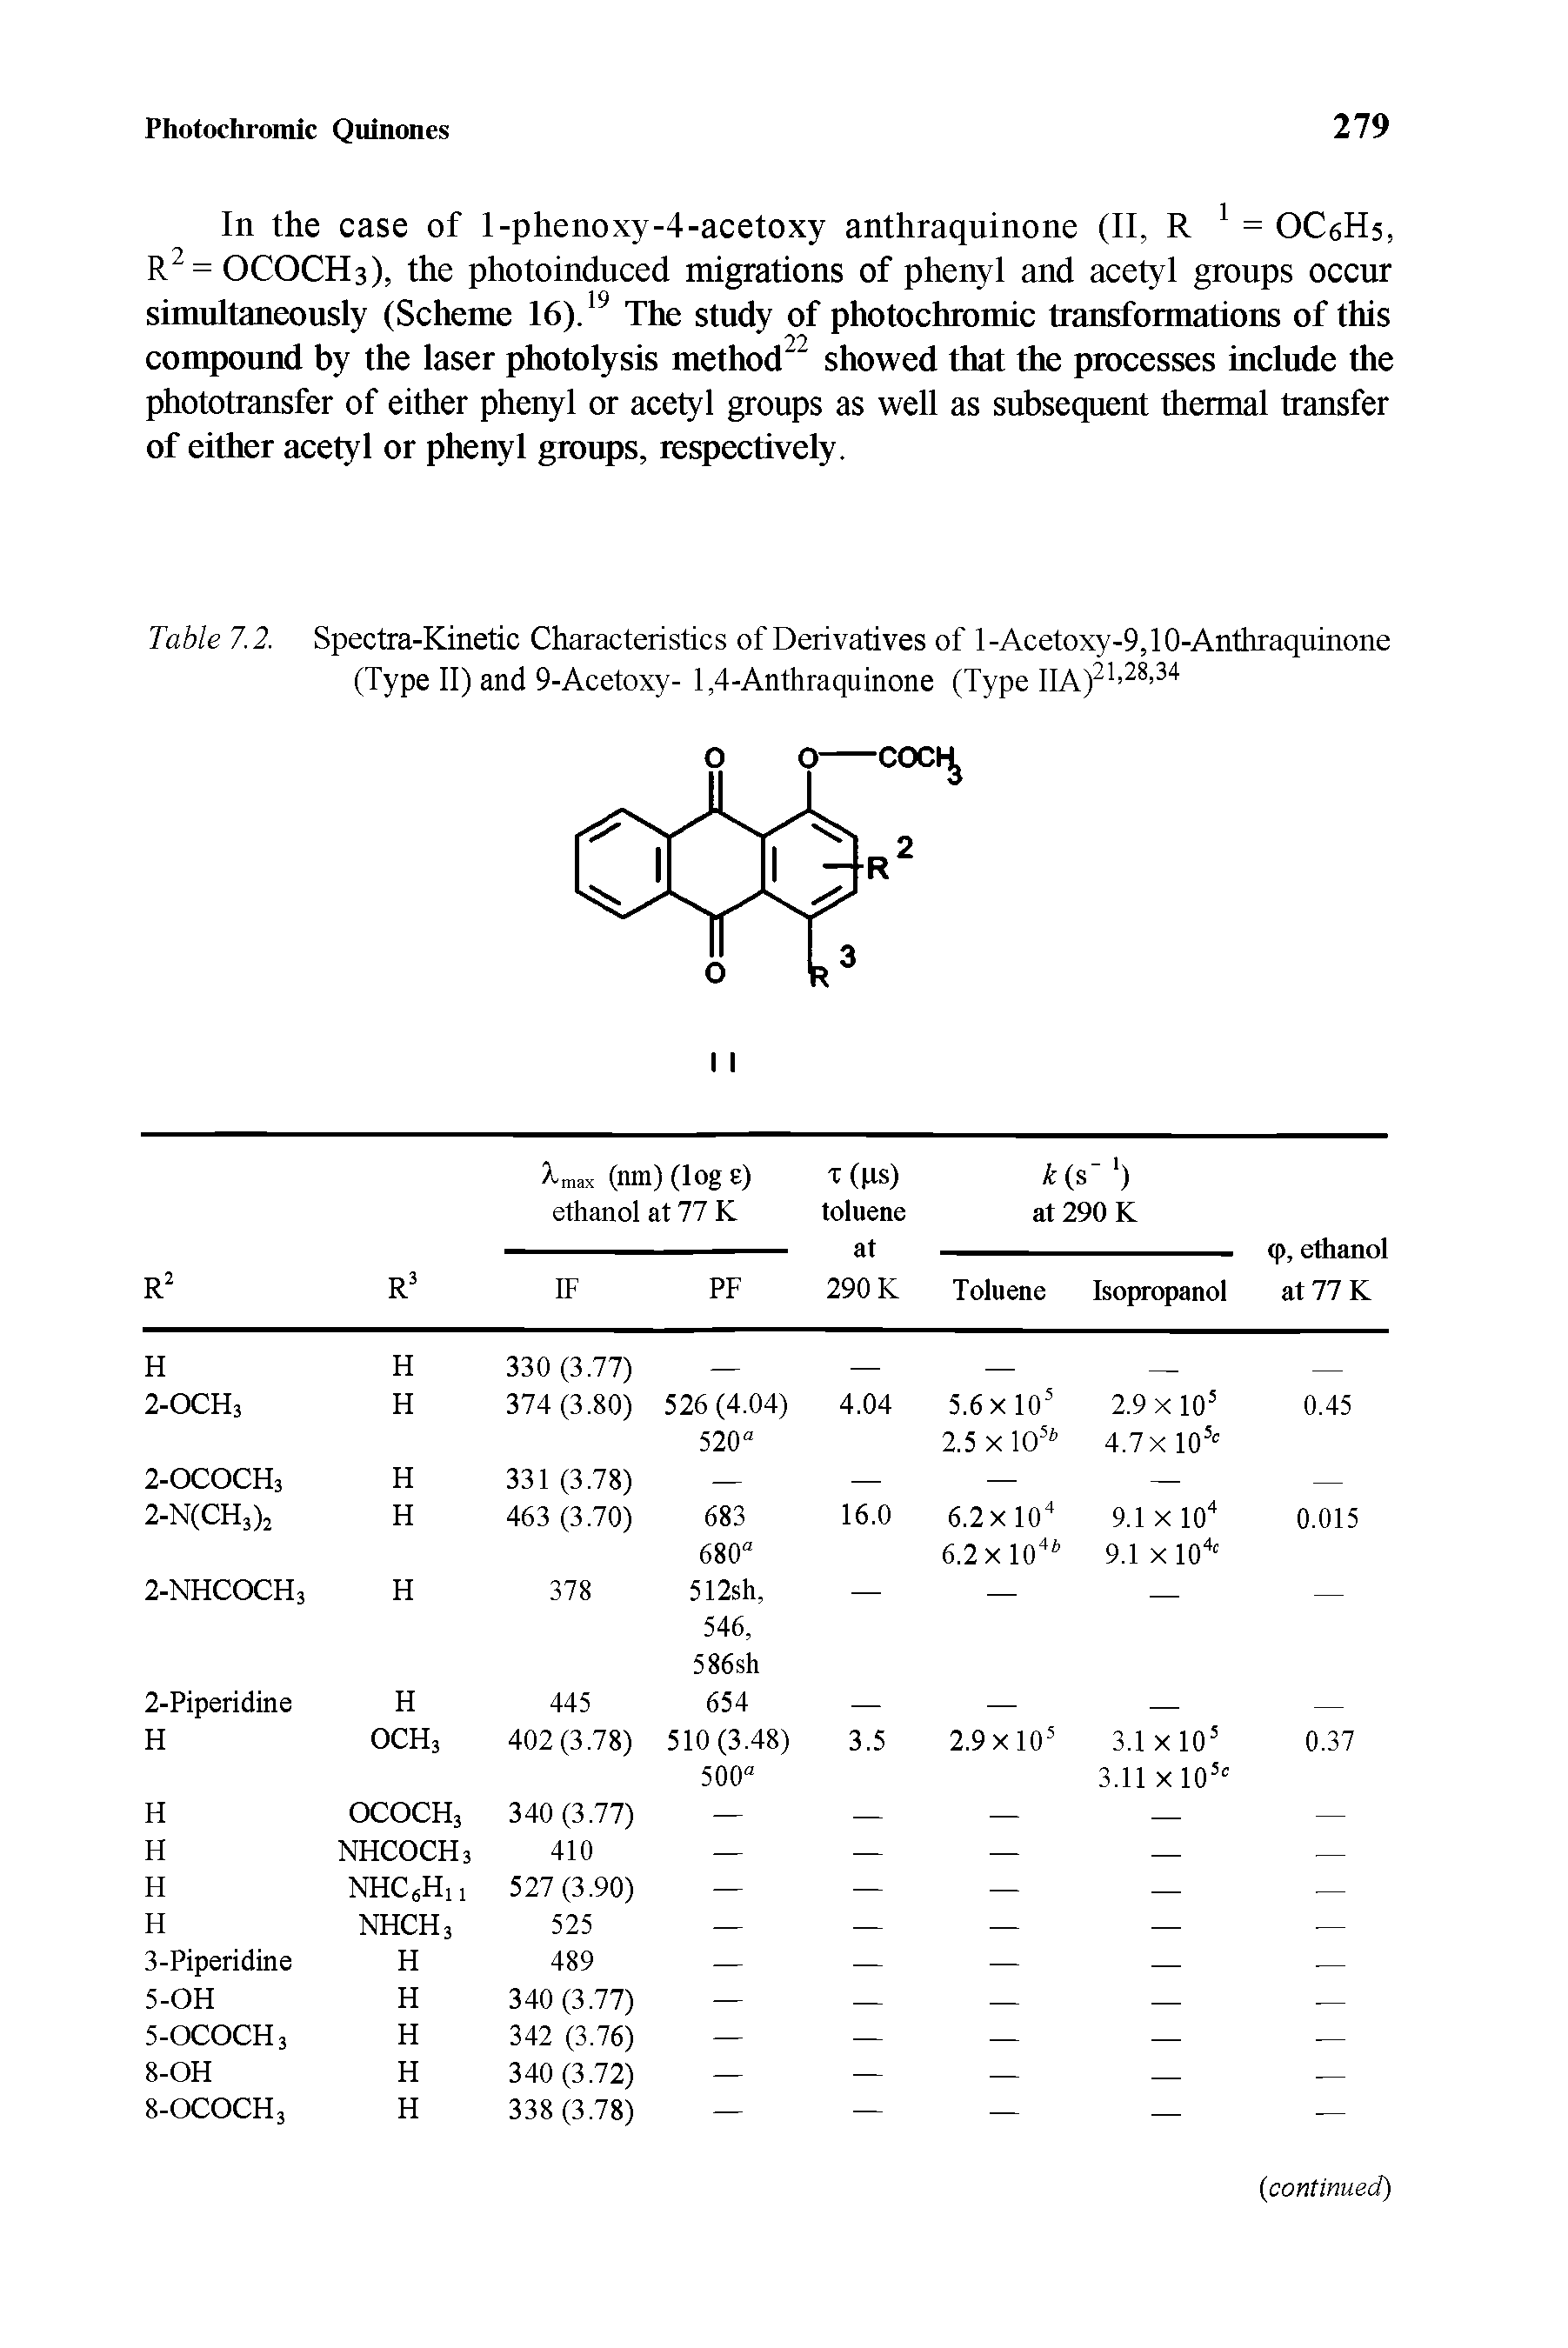 Table 7.2. Spectra-Kinetic Characteristics of Derivatives of 1-Acetoxy-9,10-Anthraquinone (Type II) and 9-Acetoxy- 1,4-Anthraquinone (Type HA)21,28 34...